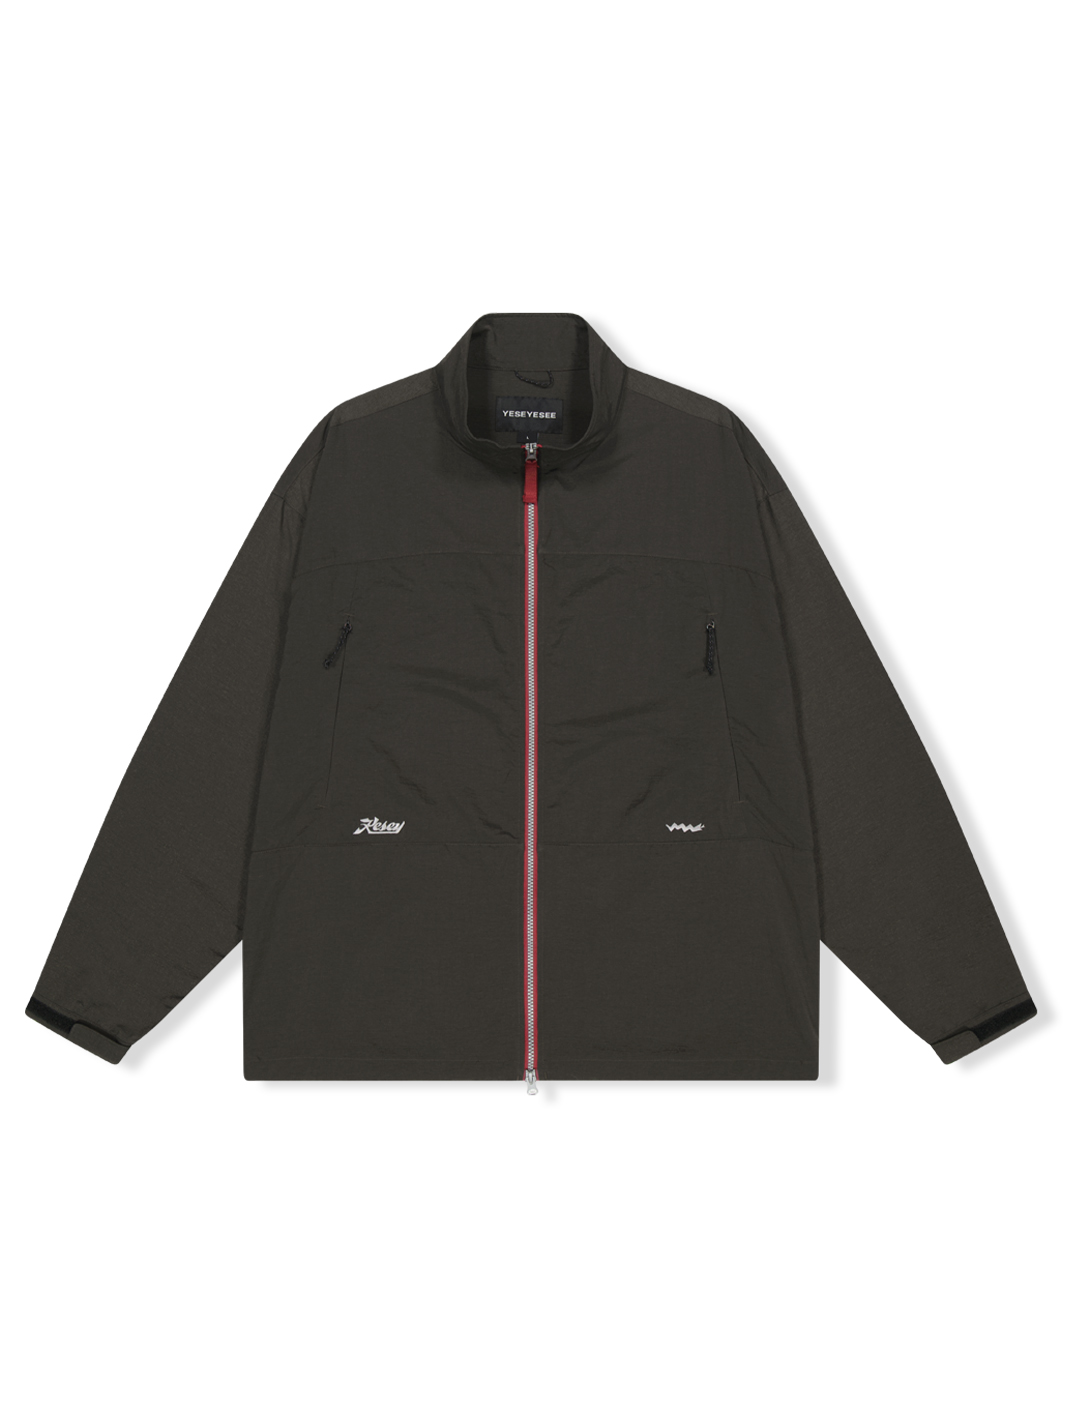 Y.E.S Almighty Jacket Charcoal